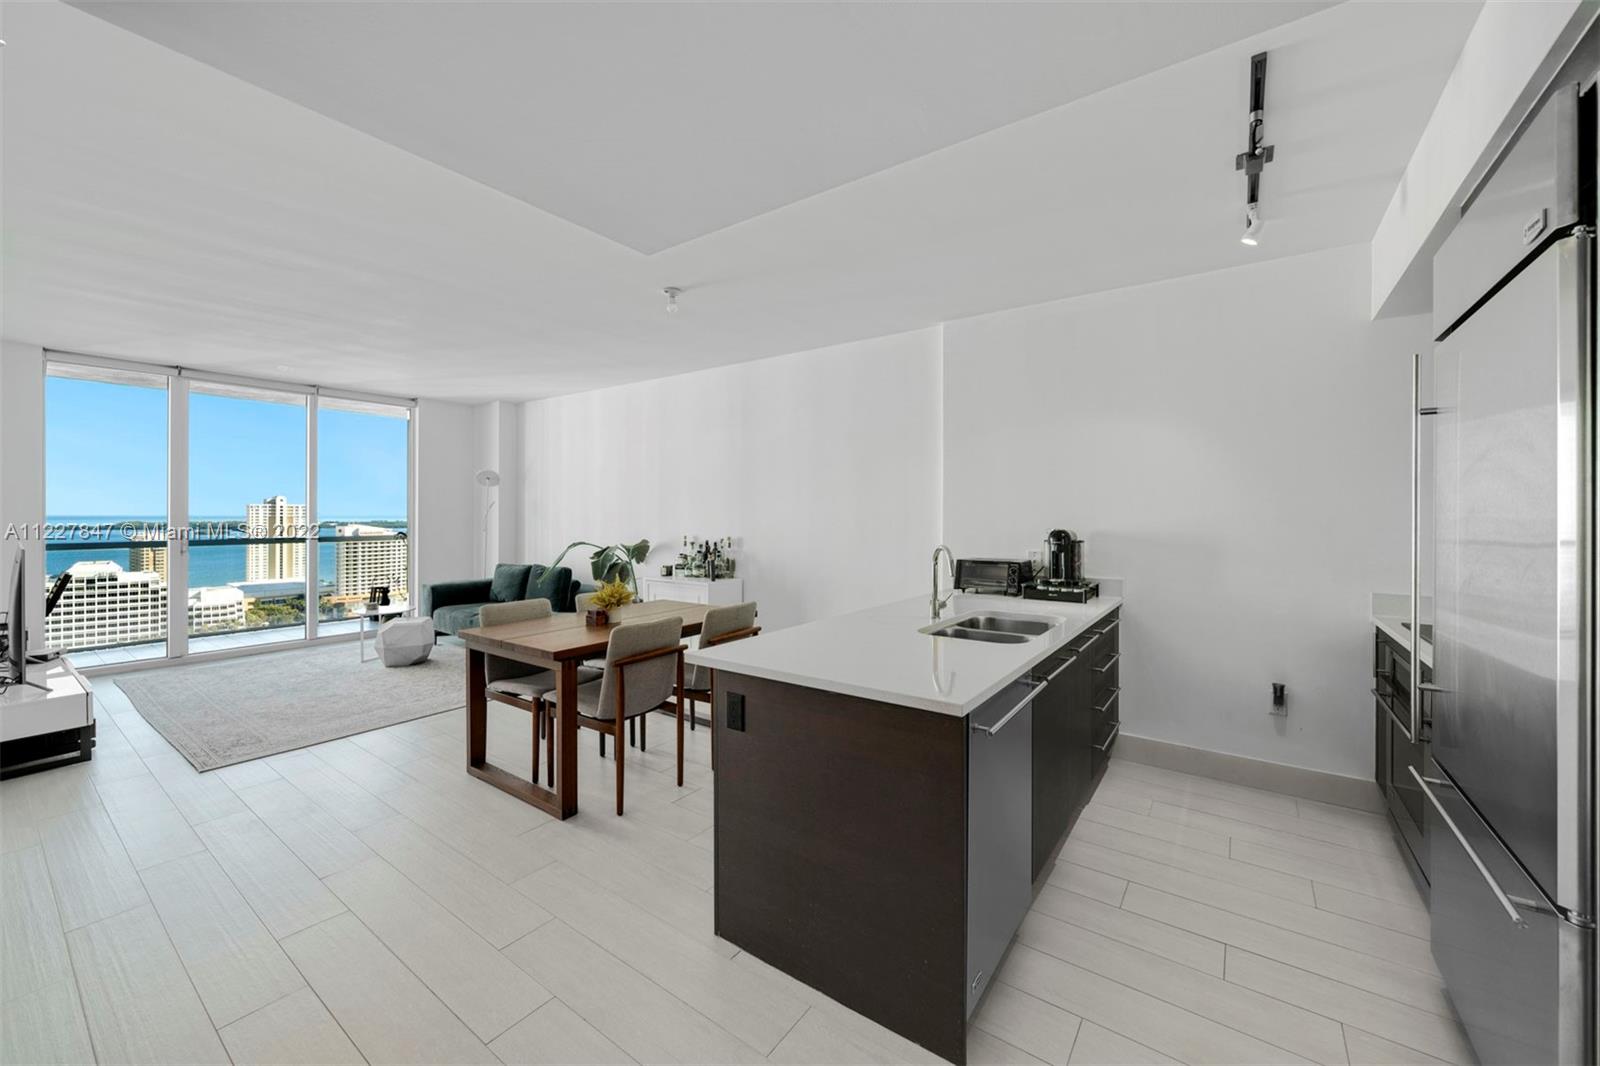 AVAILABLE AUG 1ST. A spacious & bright 1-bed condo at 500 Brickell East featuring porcelain tiled floors throughout, stainless steel kitchen appliances, in-unit washer/dryer, blackout shades in bedroom/solar shades in living room, his & hers bathroom vanities, a glass-enclosed shower & separate tub, spacious walk-in closet, and floor-to-ceiling windows w/ direct views of Biscayne Bay & the city skyline from the 28th floor. Building amenities: a rooftop sundeck w/ heated pool, an infinity-edge pool on the 11th floor, his & hers sauna and steam rooms, fitness center, theater, club room, sports room w/ billiards table & kitchen, and 24-hour concierge & valet parking. 1 block from the shops, restaurants, and entertainment at Brickell City Centre. Can be rented turnkey furnished for $4,500/mo.